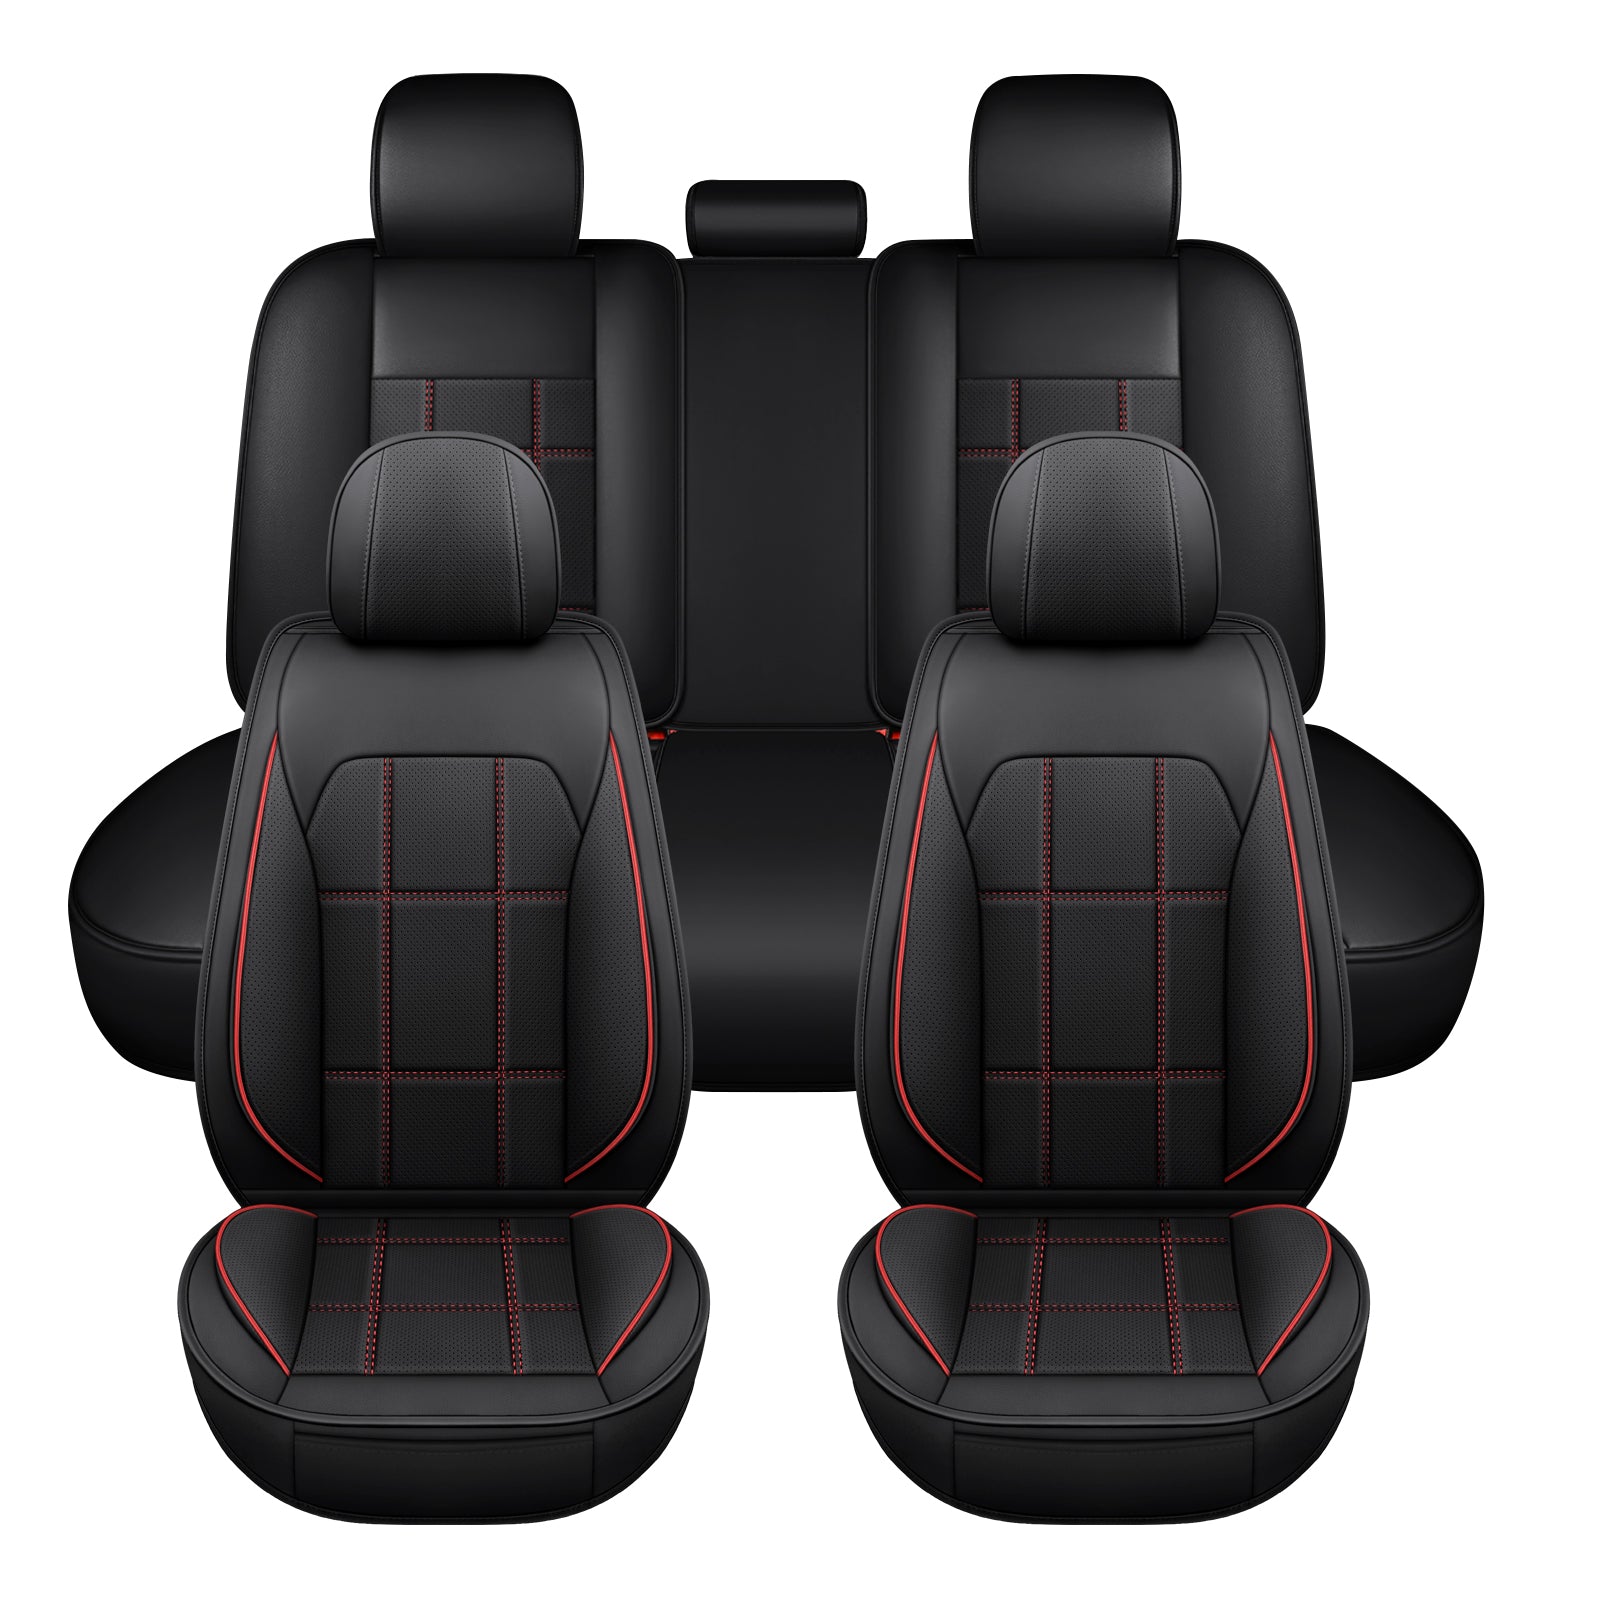 4 Wheeler Vehicle Black Universal Electronic Car and Home Heated Seat Cover  at Rs 599/piece in Udaipur